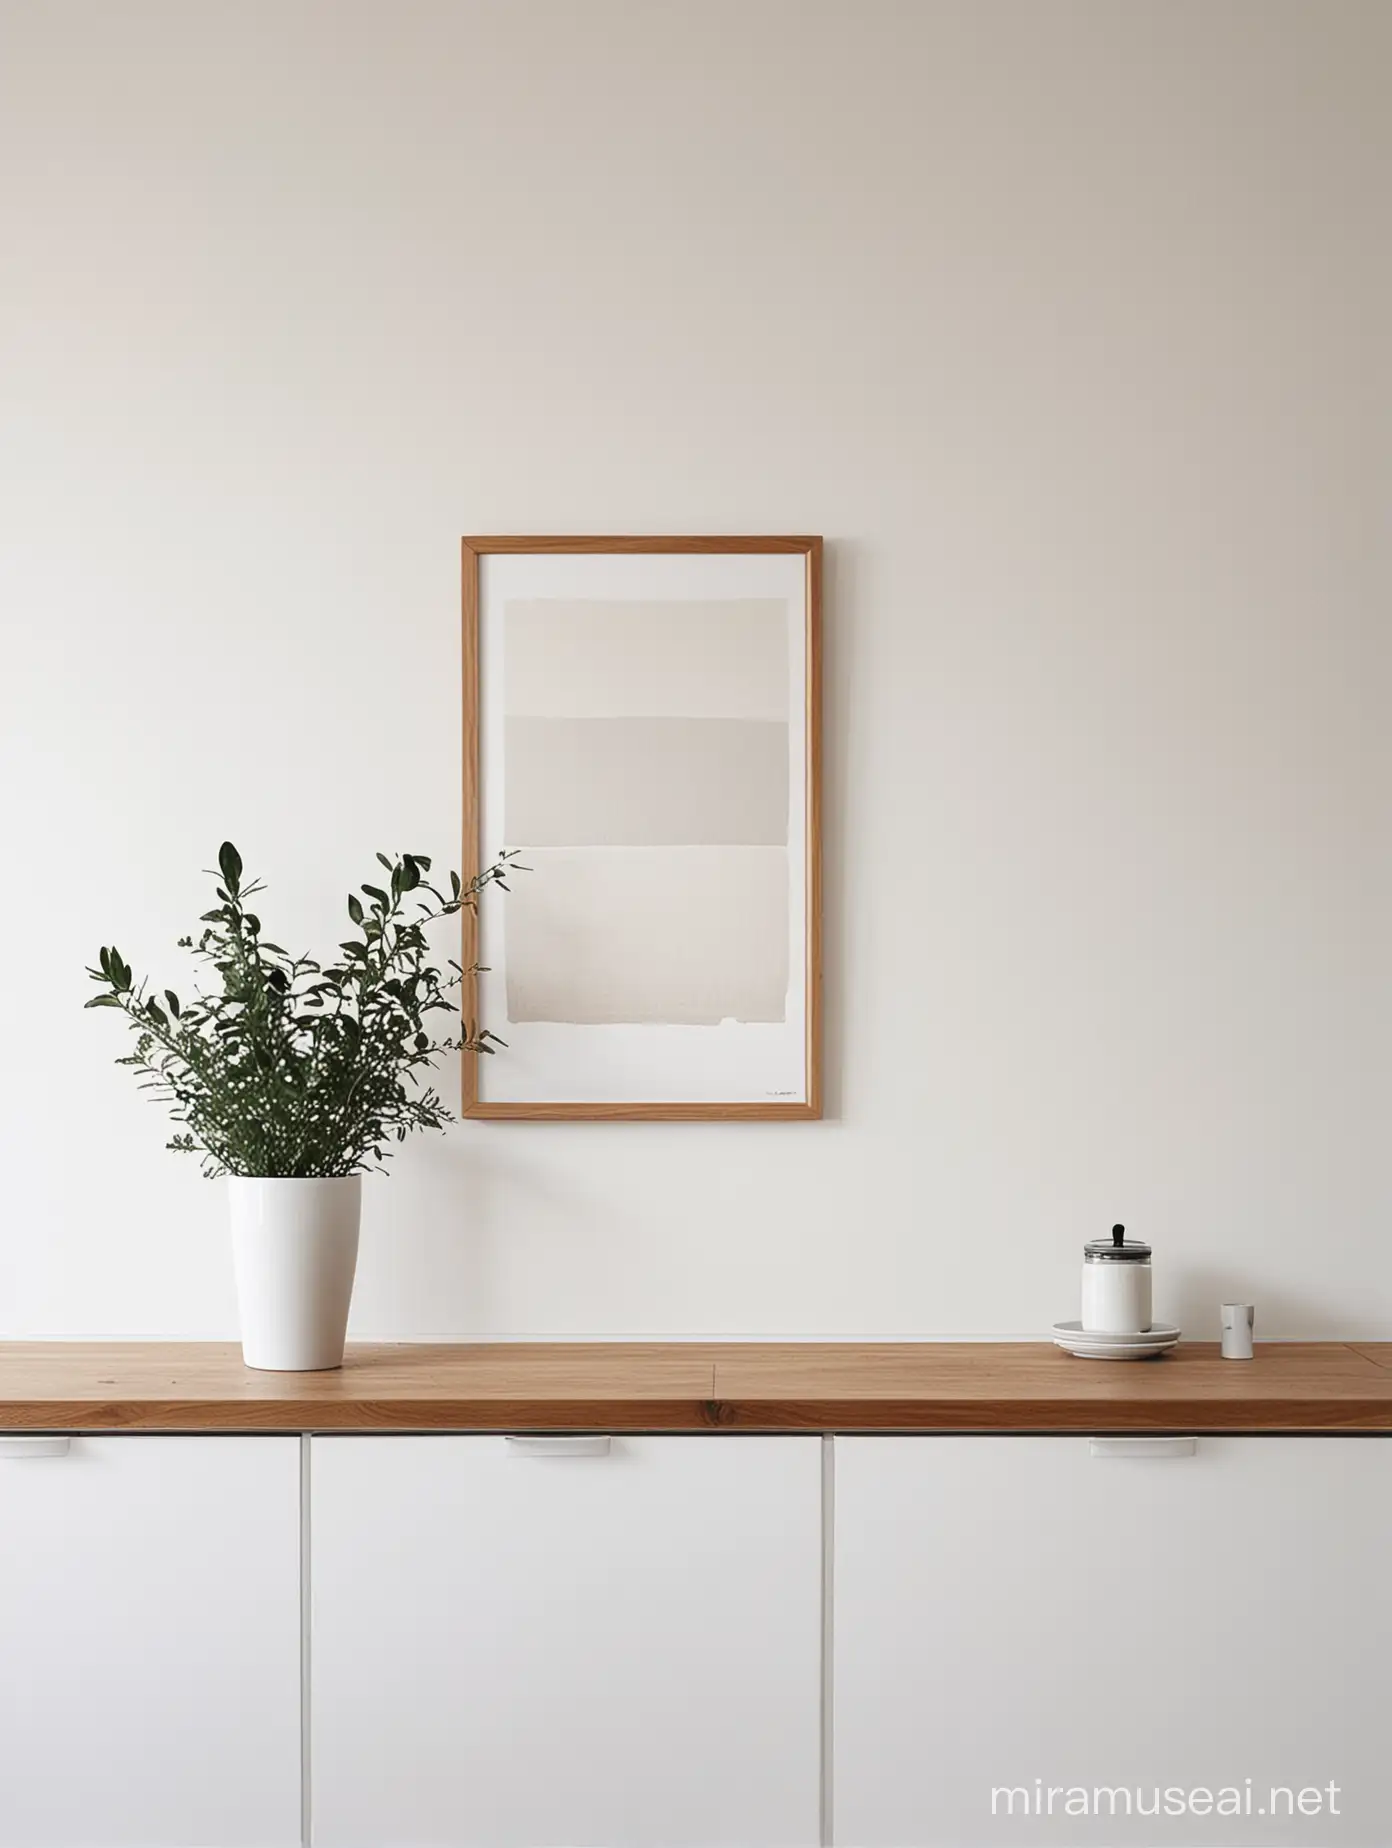 Small square painting on white wall, wooden framed, minimal white kitchen